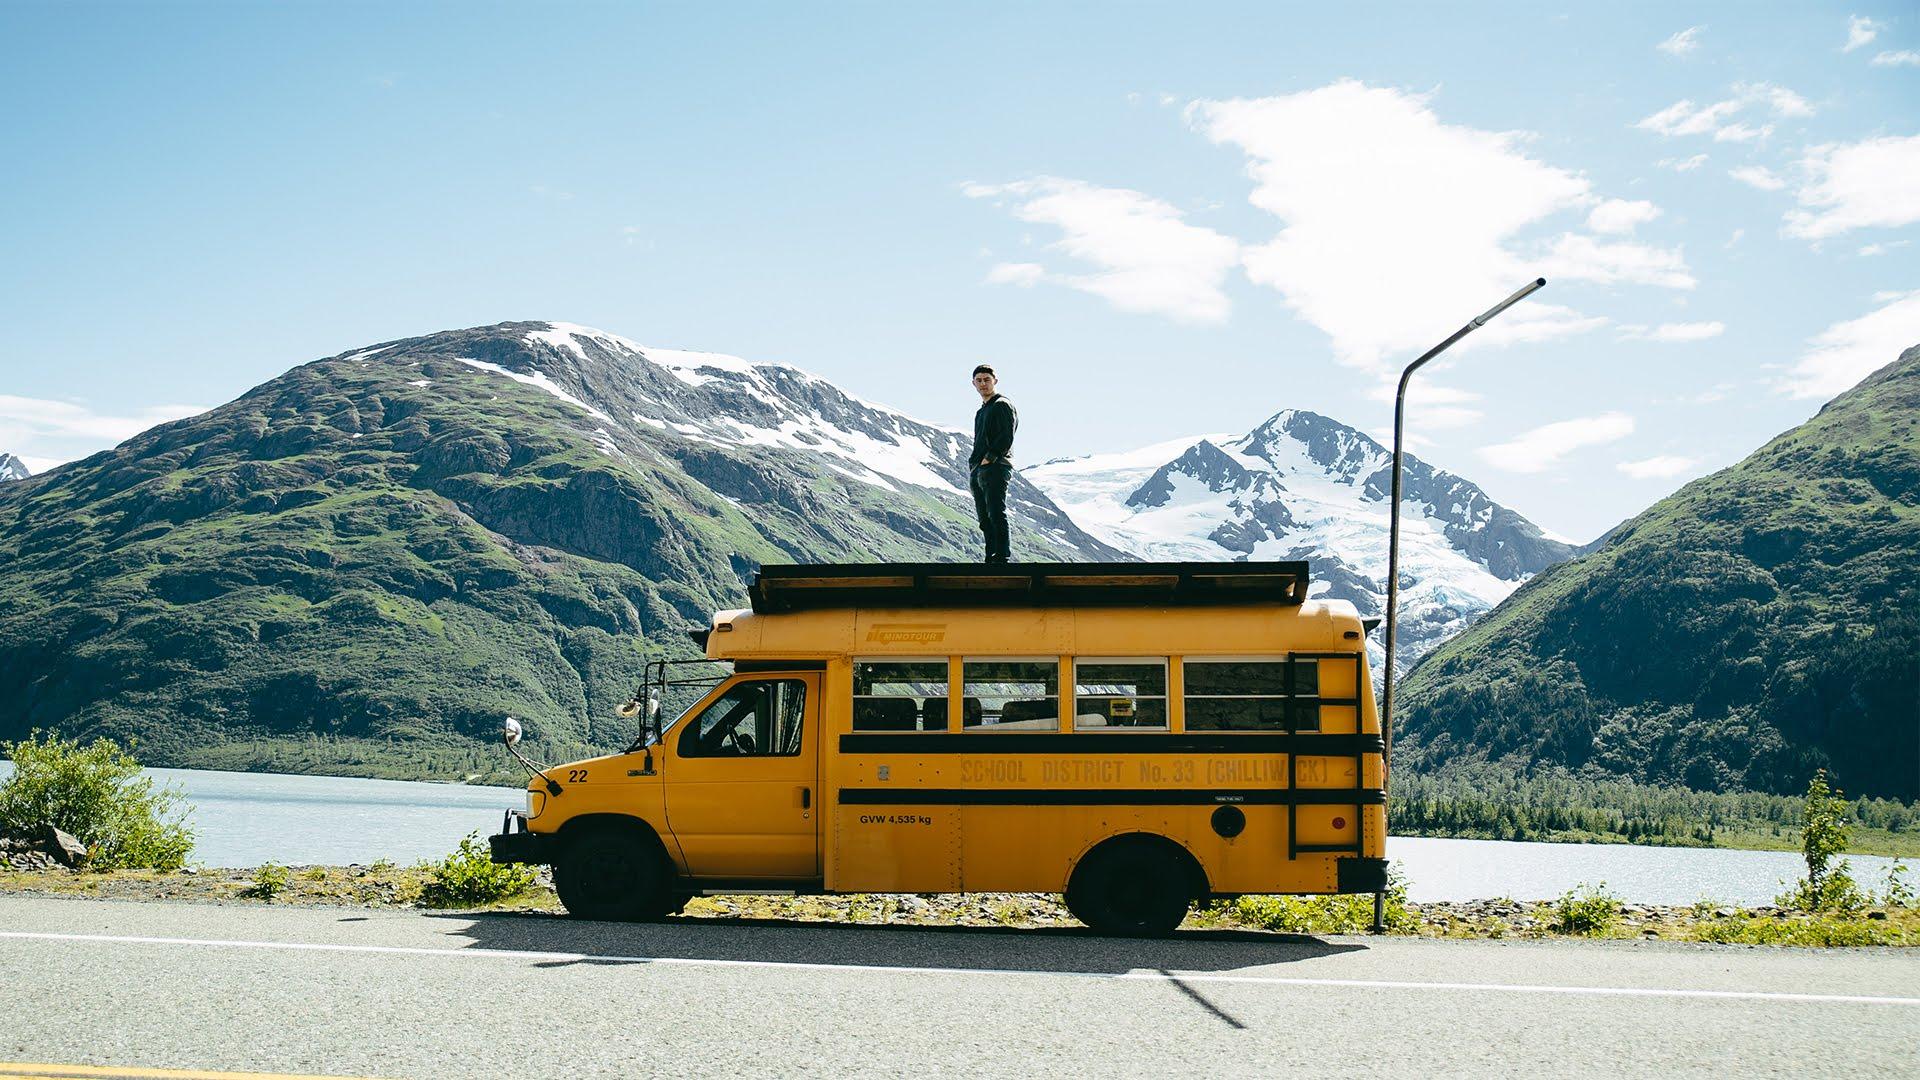 Check out this amazing road trip film with an old schoolbus